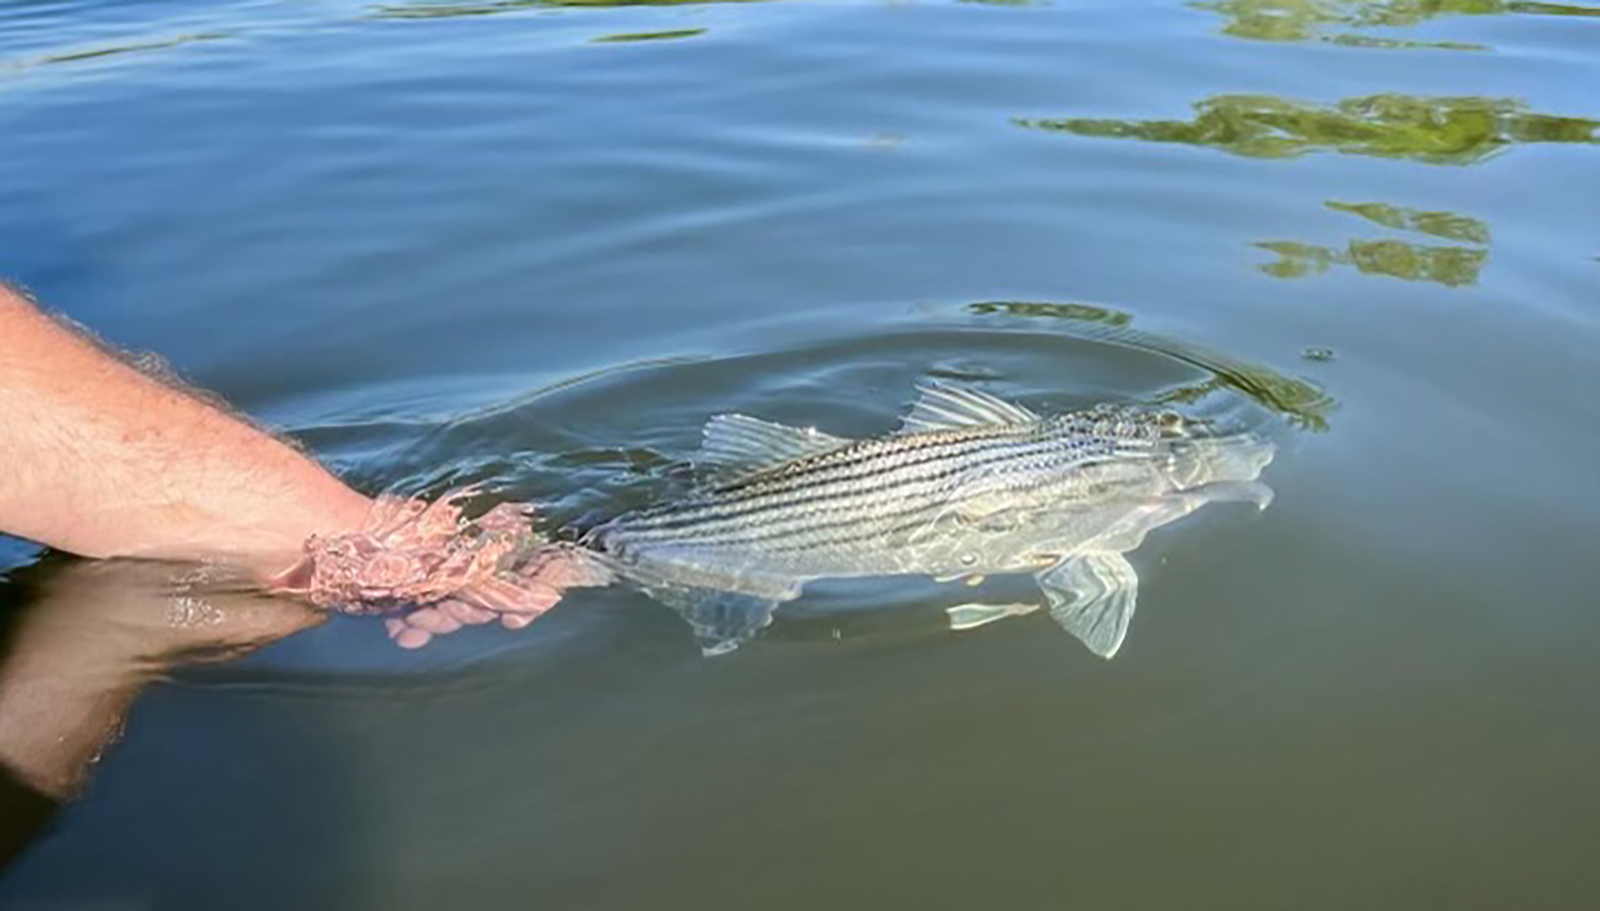 An image of a striped bass being released into the water